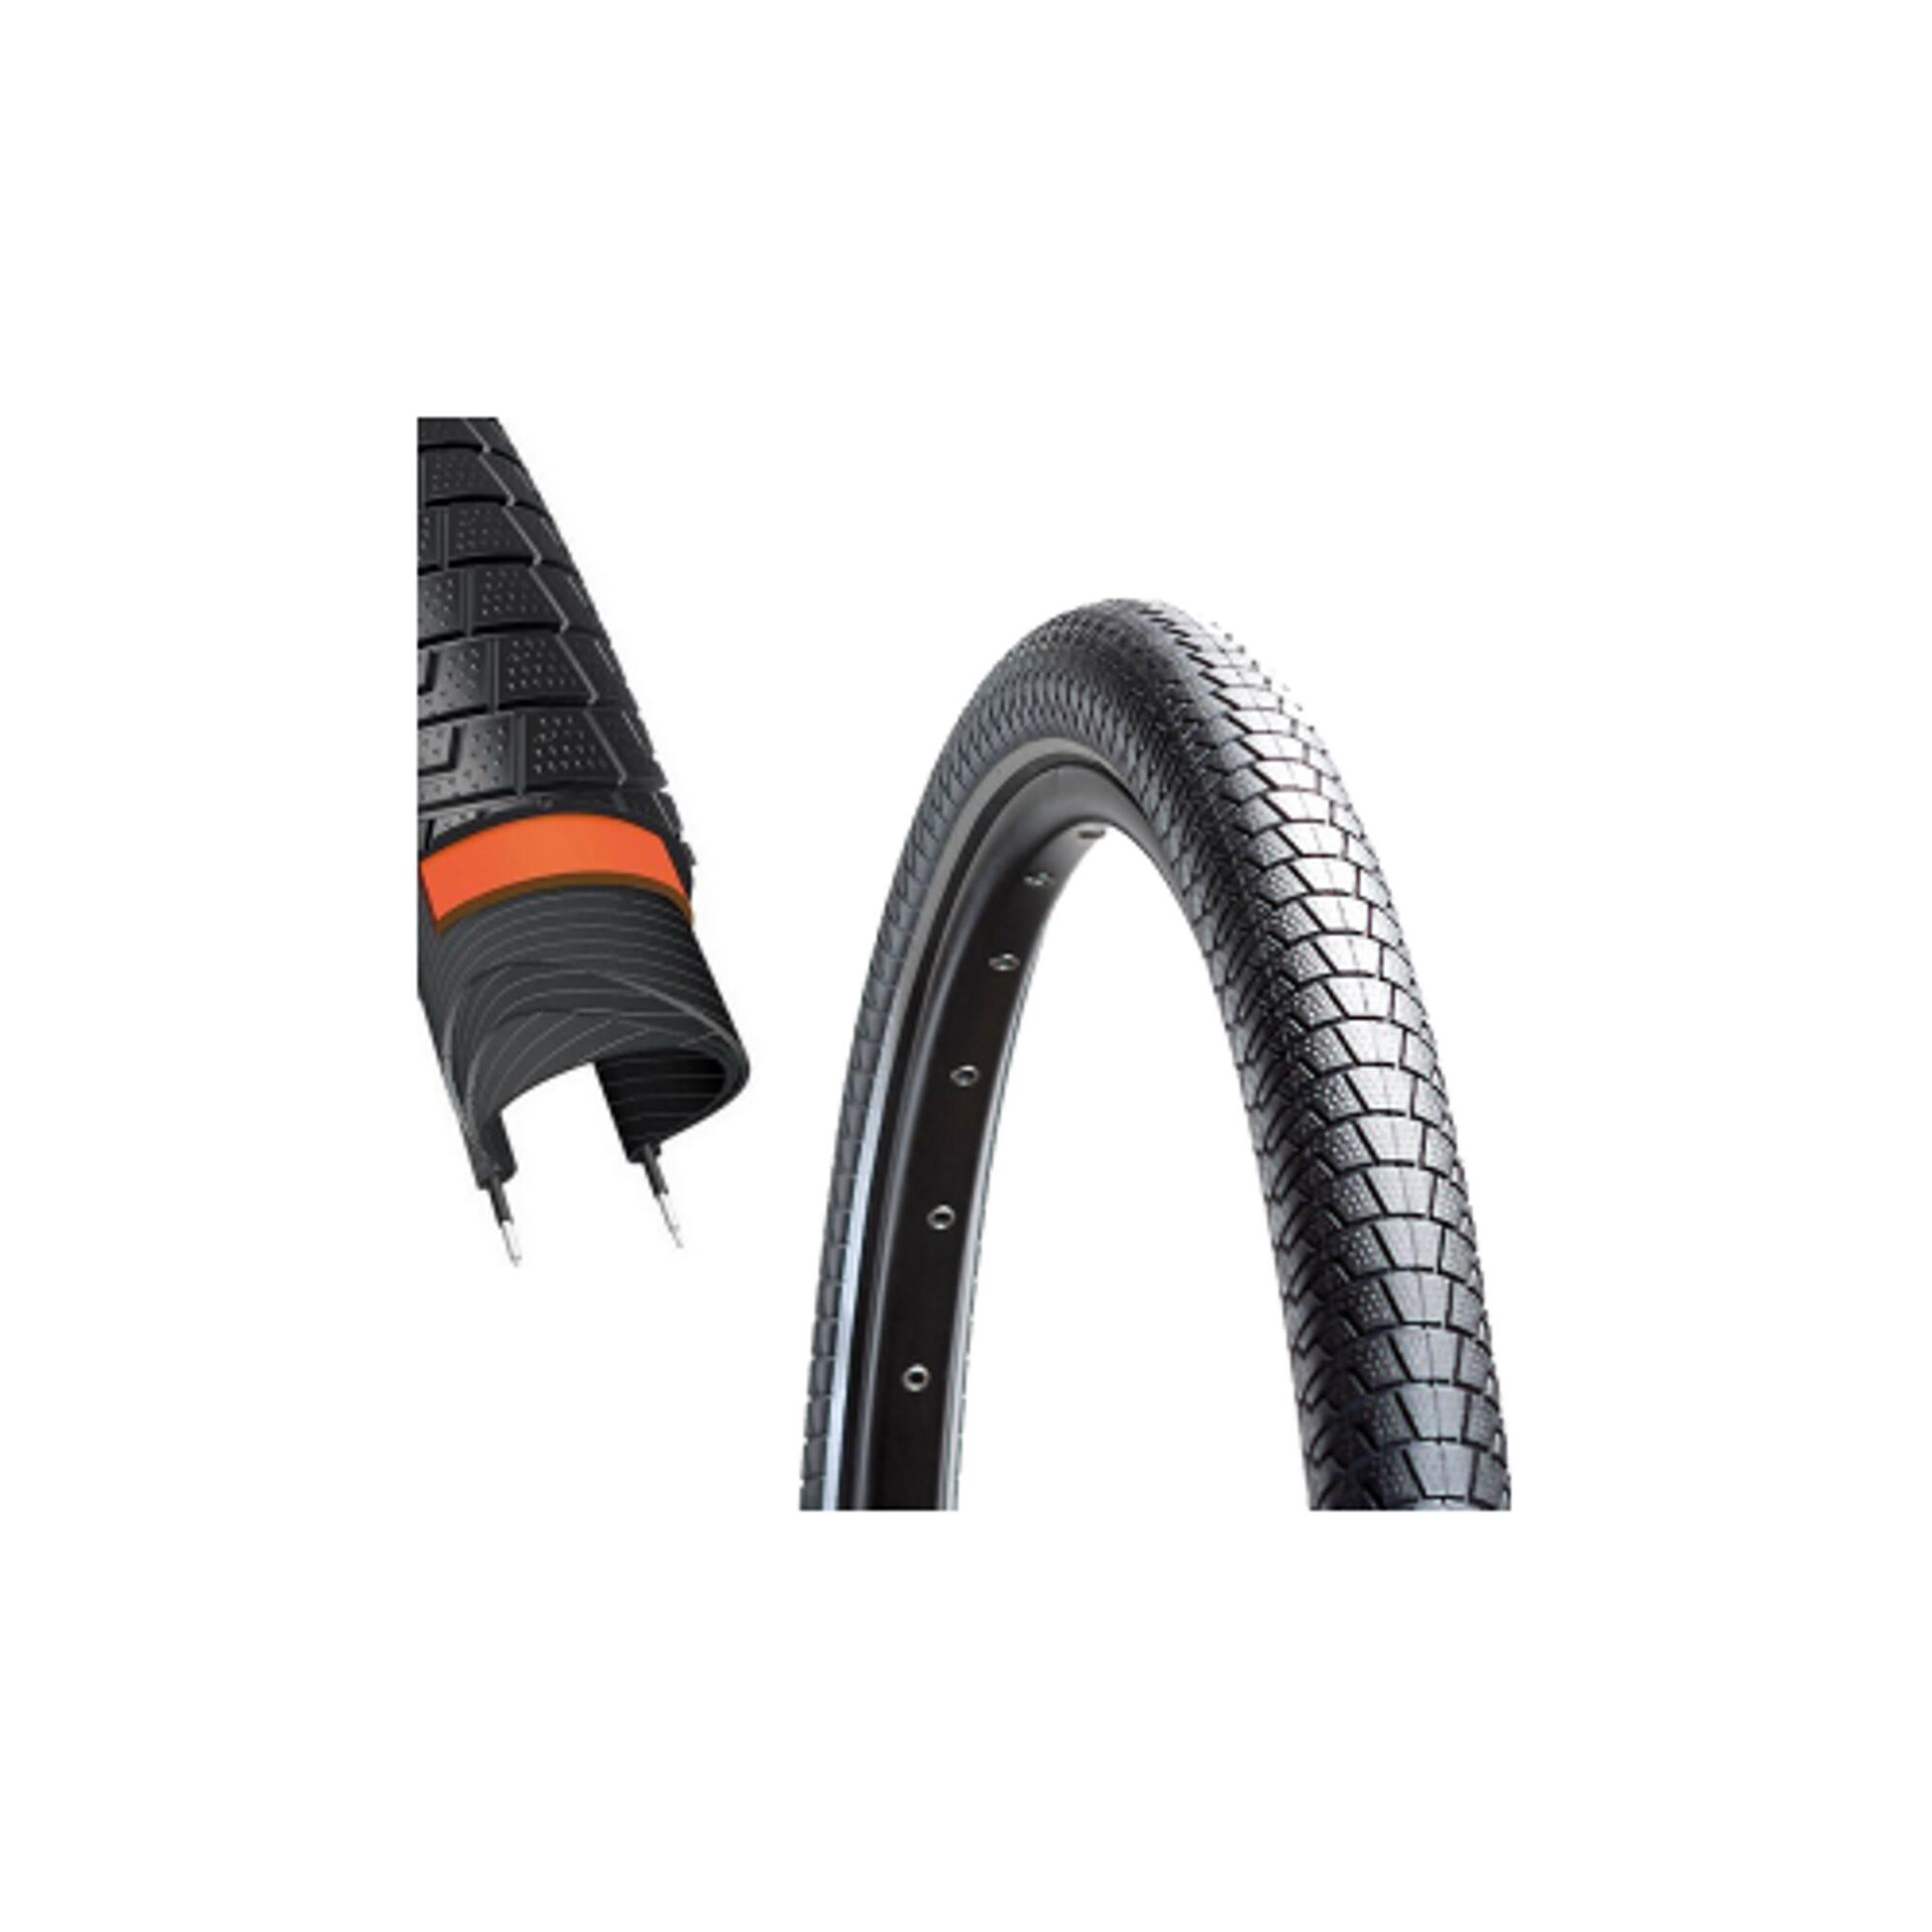 Tyre Cargo C1996 CST Brooklyn Pro 26"*2.15 55-559 For Longtail R500 Cargo Bike 1/2